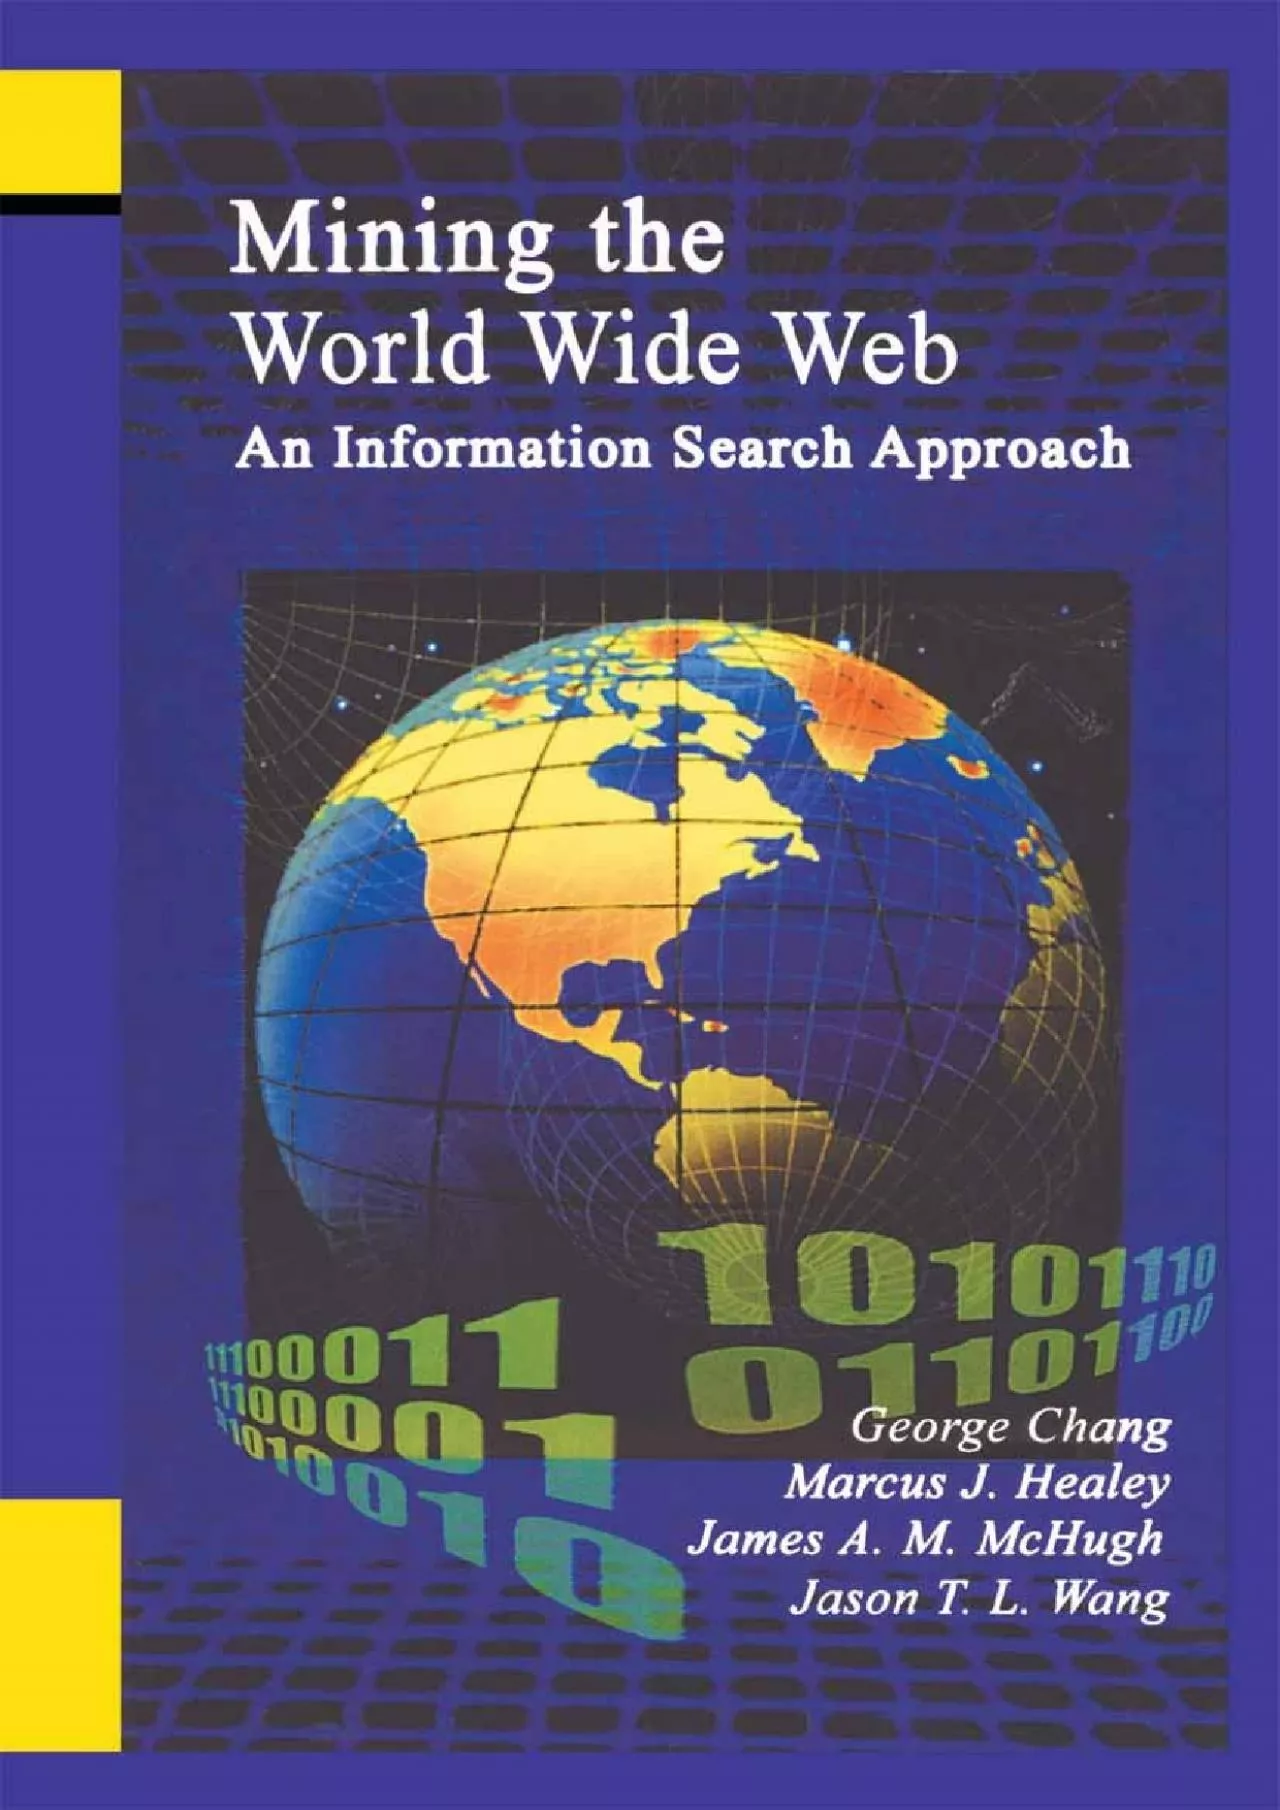 (DOWNLOAD)-Mining the World Wide Web: An Information Search Approach (The Information